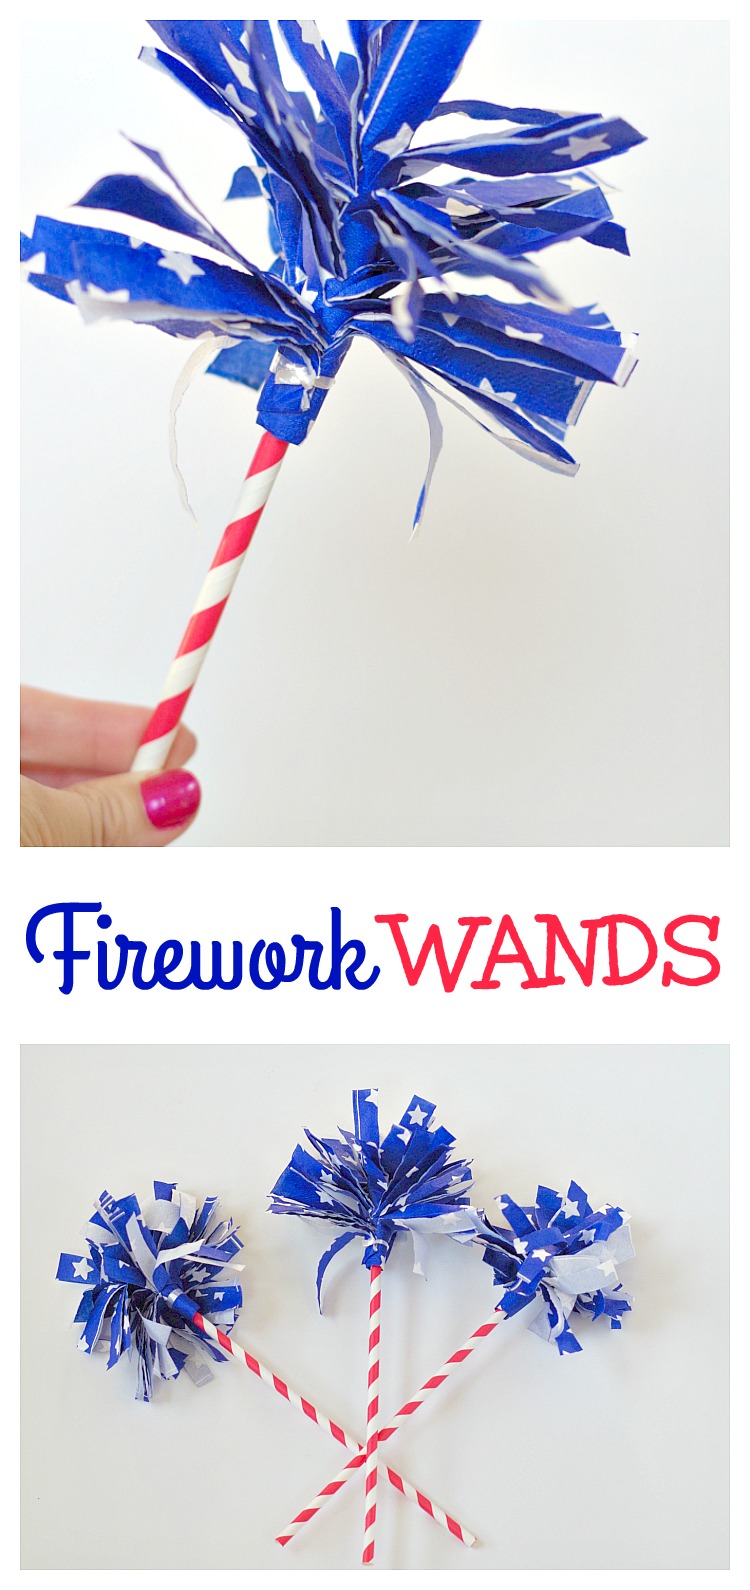 Firework Wands! Make these simple firework wands for 4th of July with just napkins and paper straws.